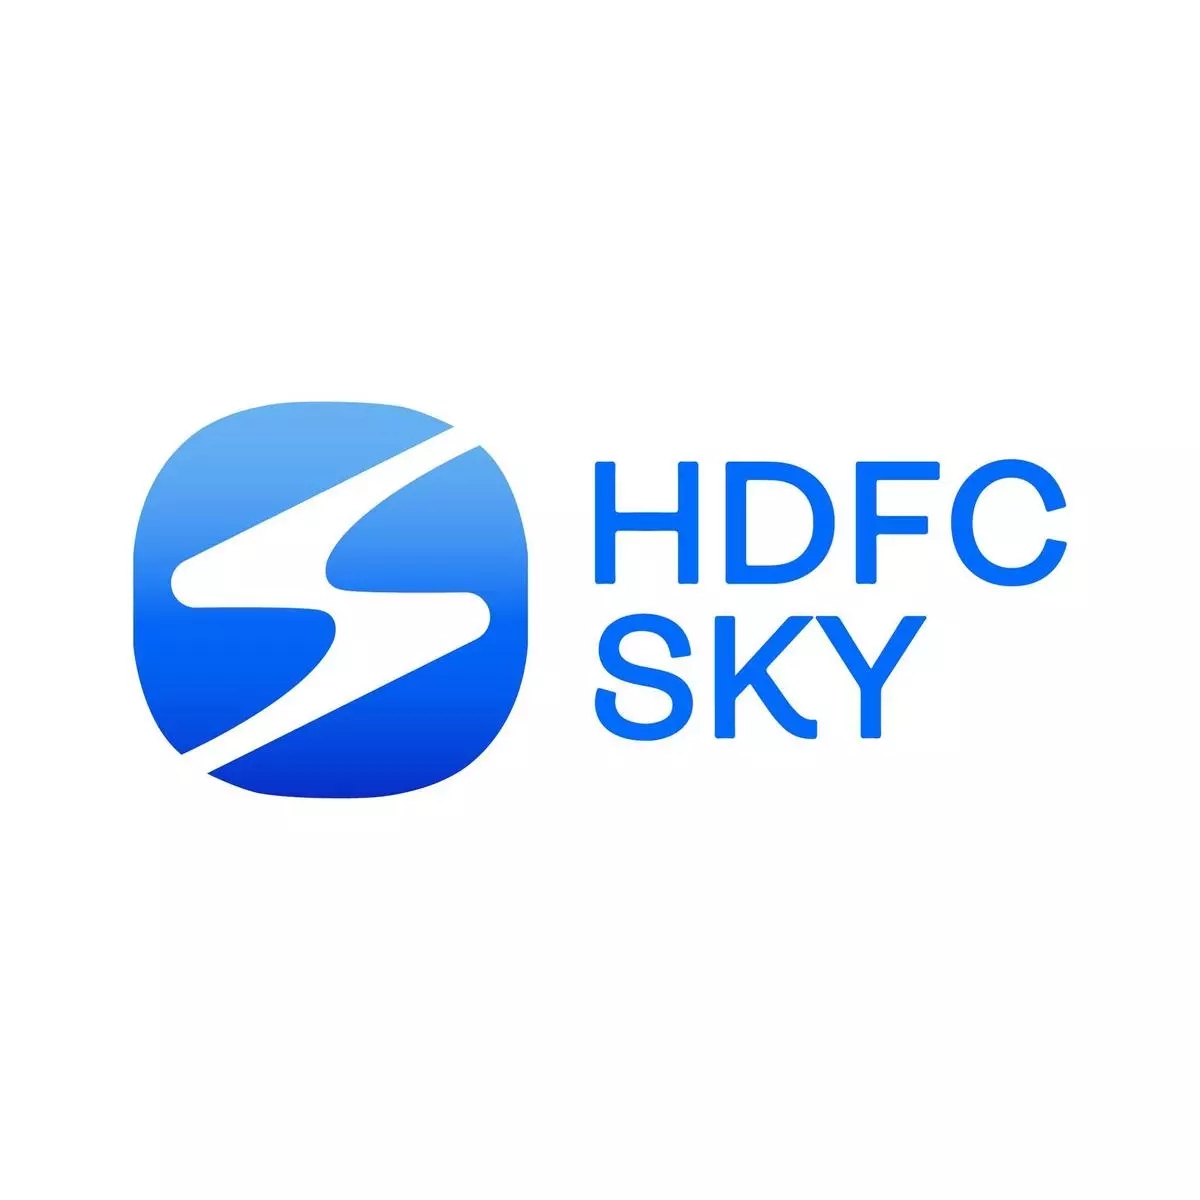 Khalid Sulaiman appointed to HDFC Board of Directors